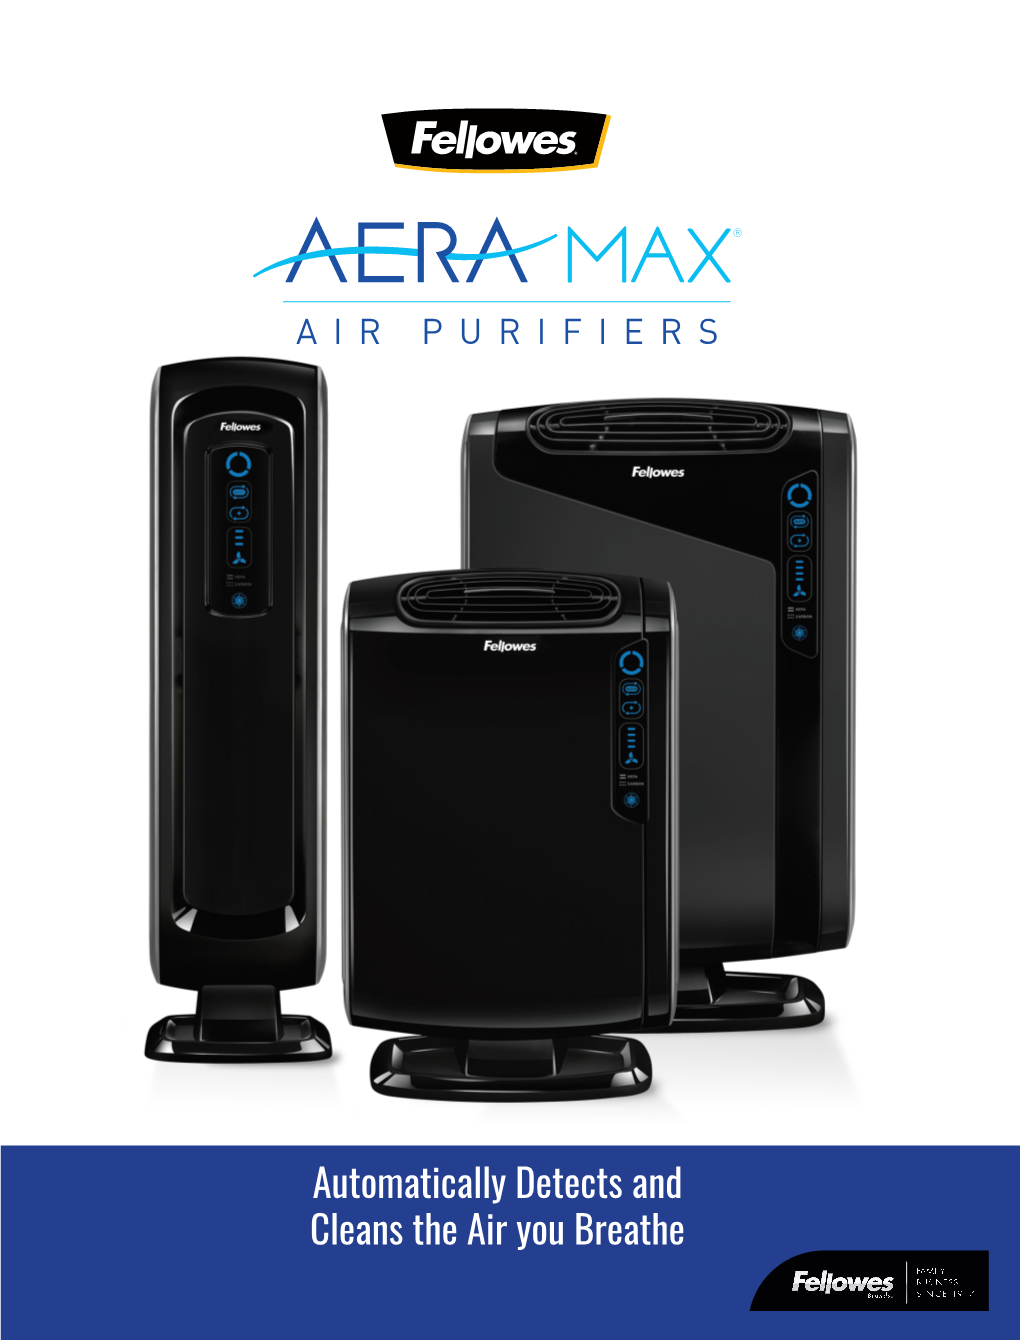 Automatically Detects and Cleans the Air You Breathe